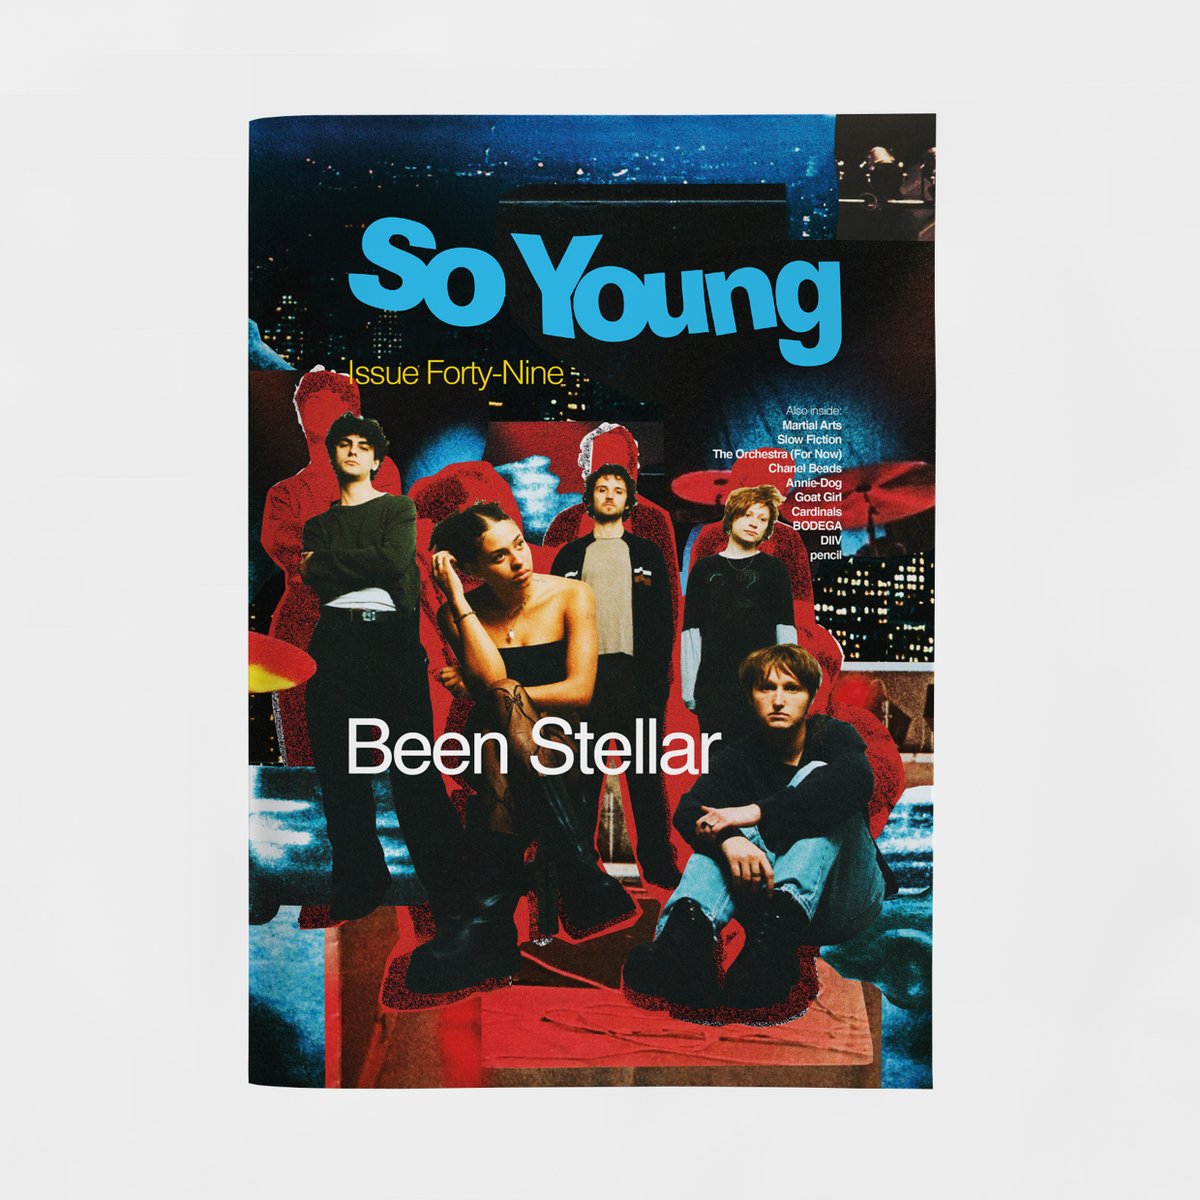 OUT TODAY 🗞️ So Young Issue Forty-Nine is out now! Featuring interviews with... @beenstellar @DIIV Goat Girl BODEGA Annie-Dog @pencilglobal @bandcardinals @slowfictionband @orchestrafornow @martialartsband Chanel Beads & more. shop.soyoungmagazine.com